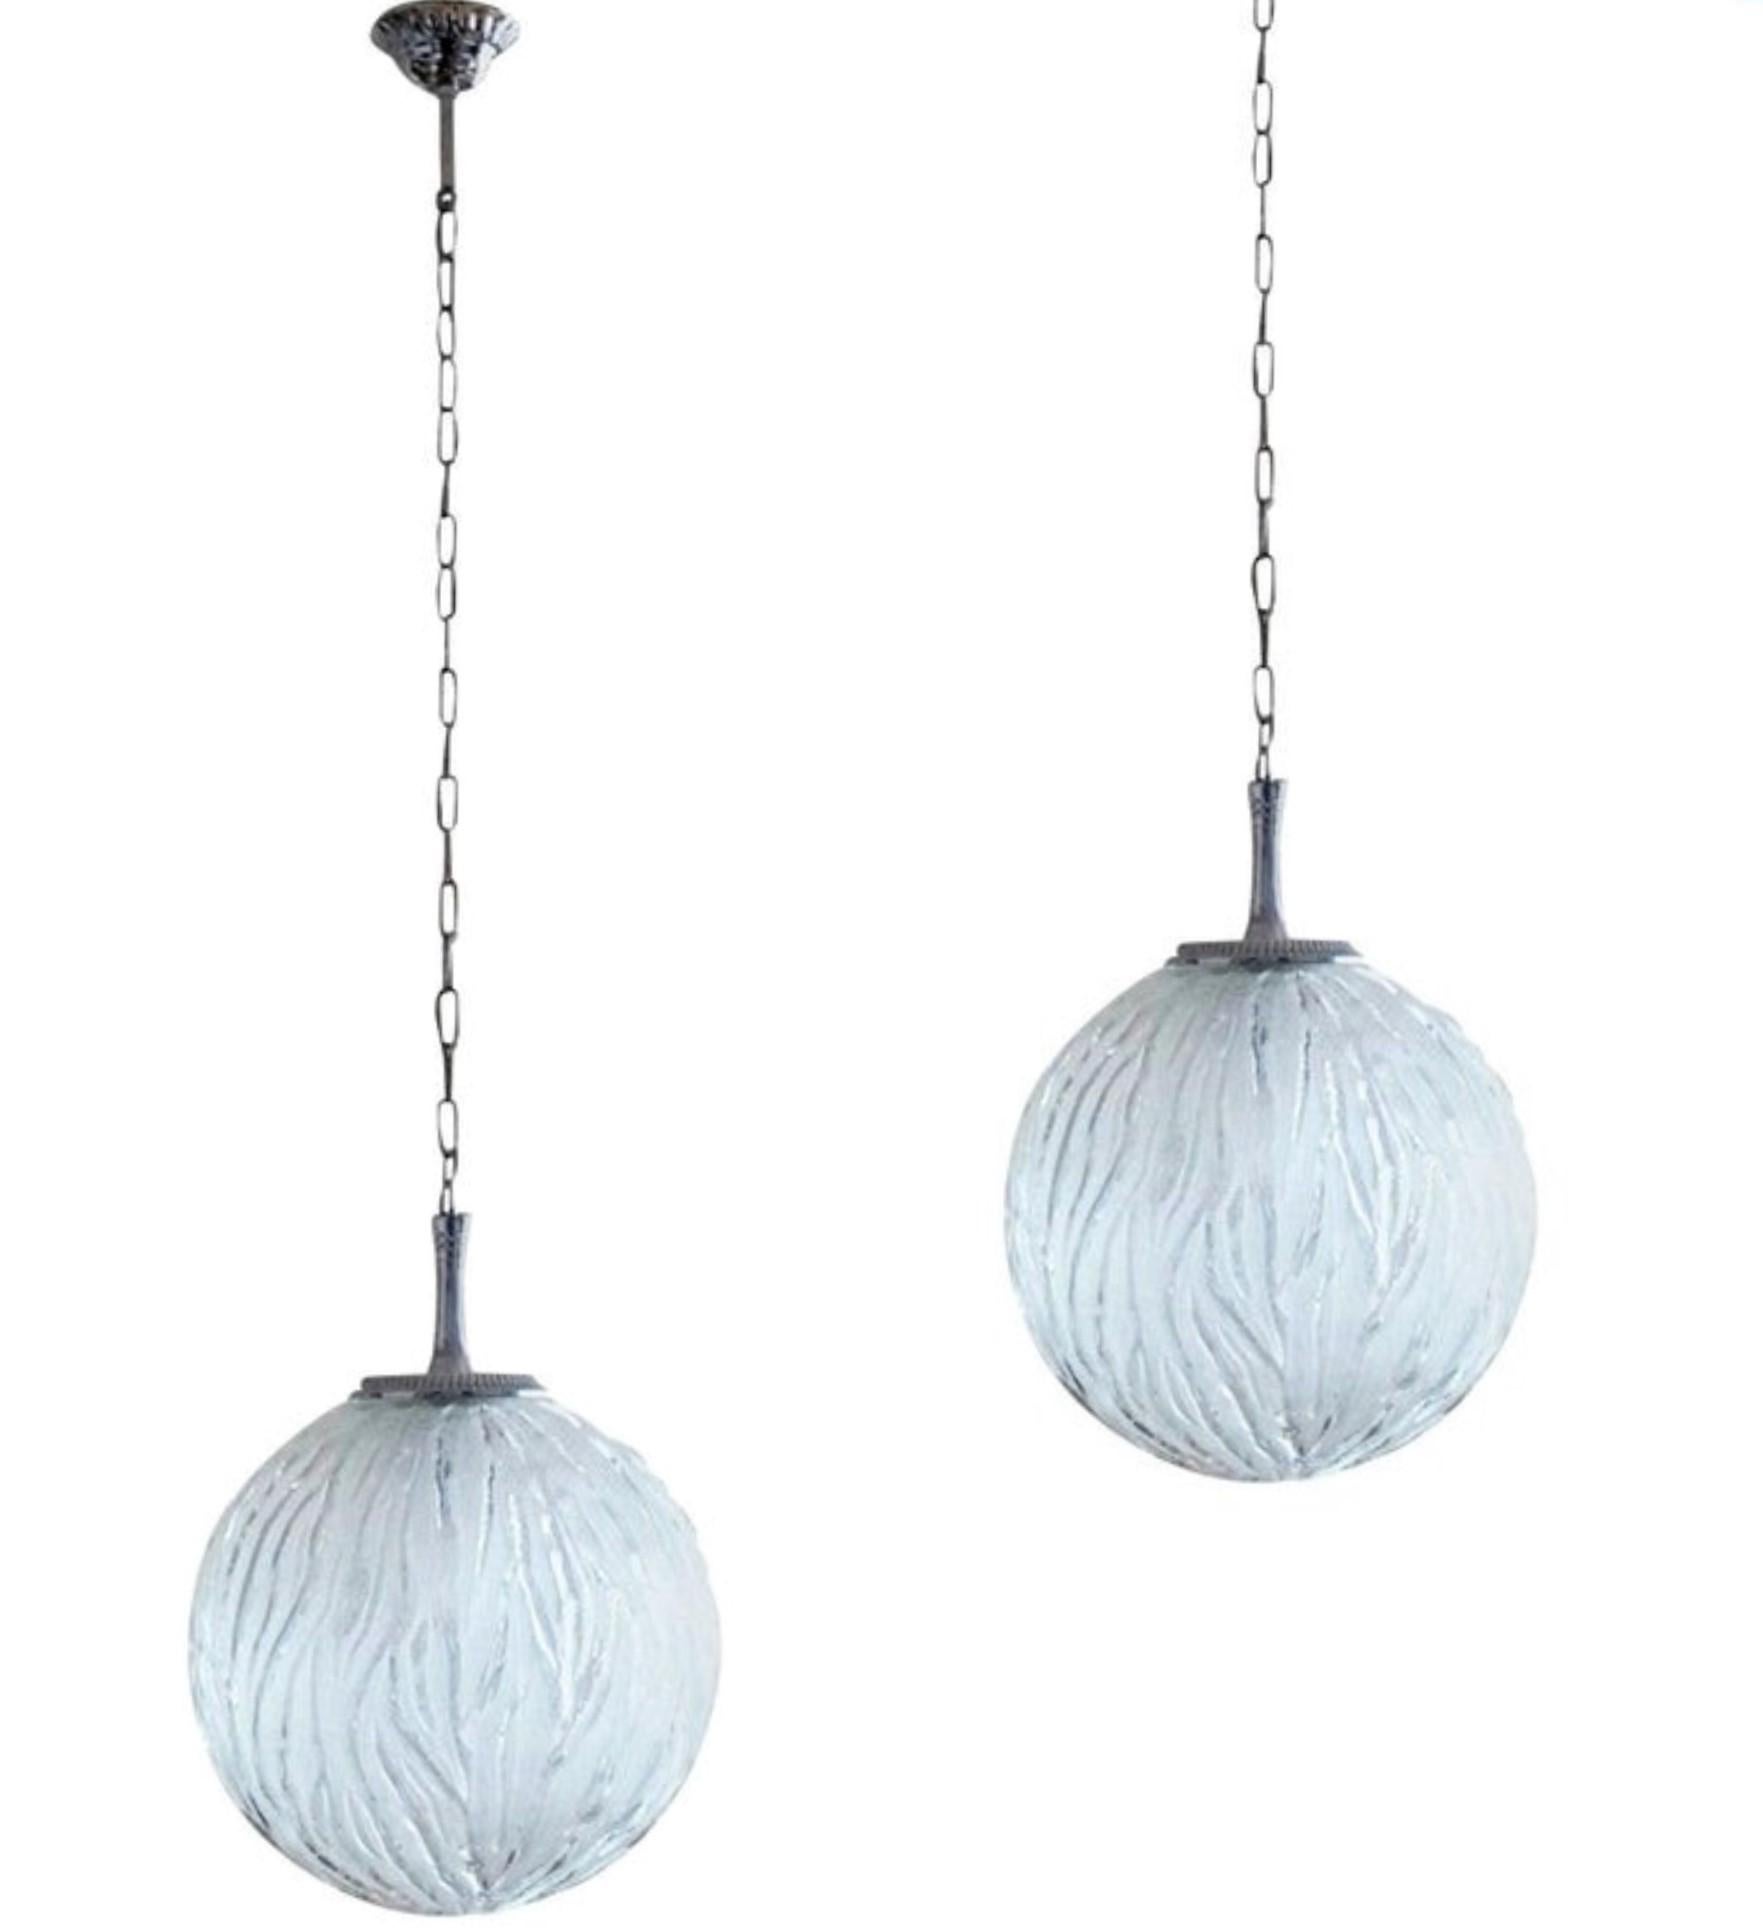 Art Deco Pair of French Degue Style Glass Sphere Pendants, 1950s For Sale